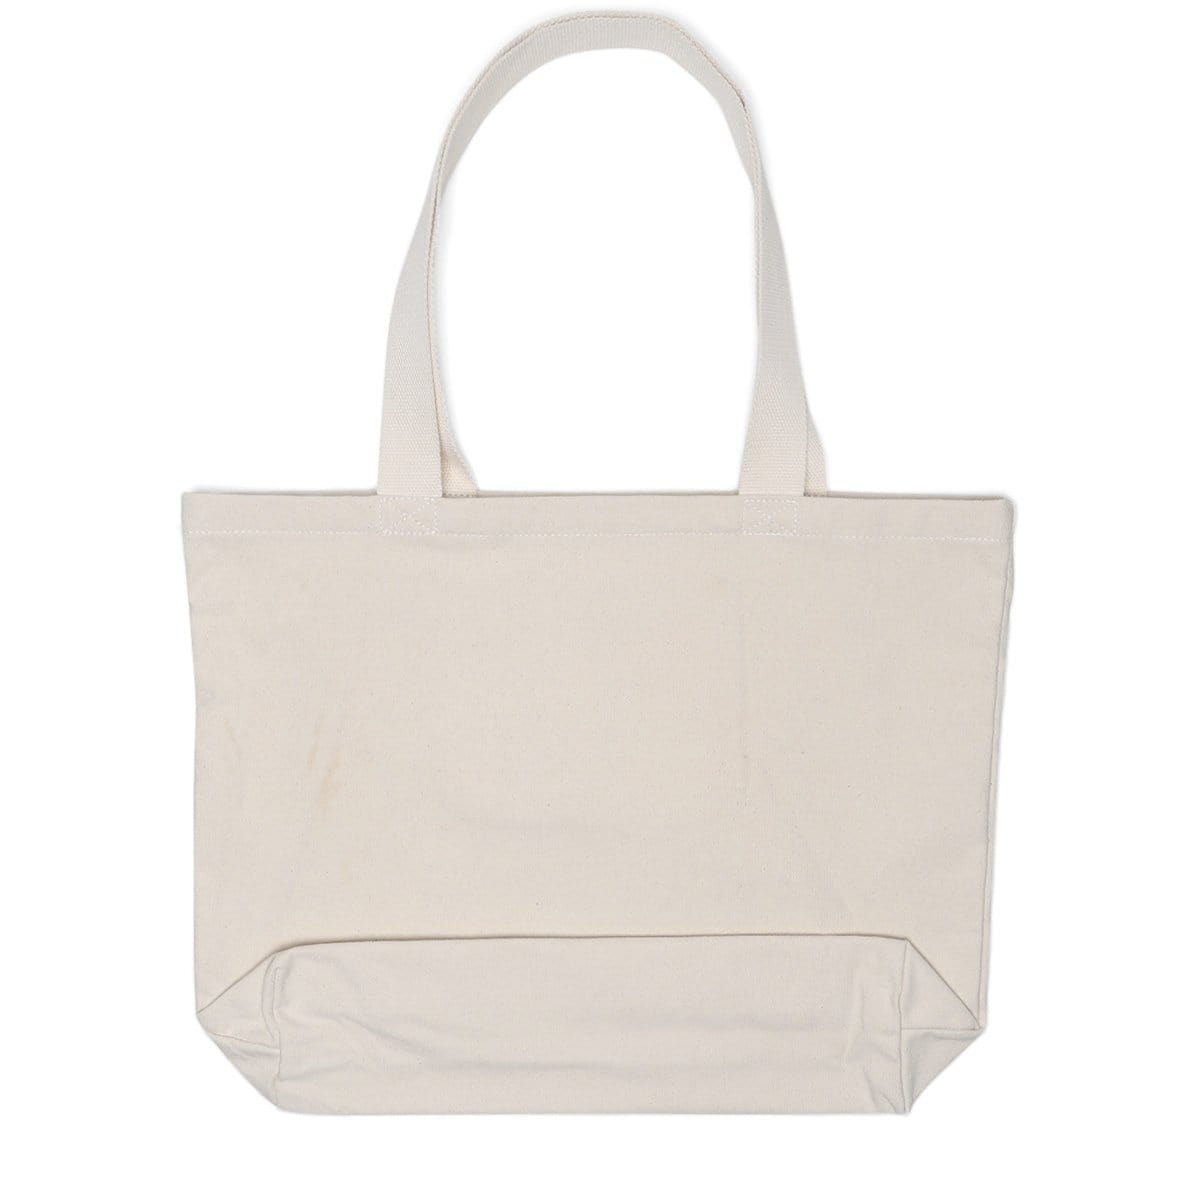 Stüssy Bags & Accessories NATURAL / O/S PEACE AND LOVE CANVAS TOTE BAG